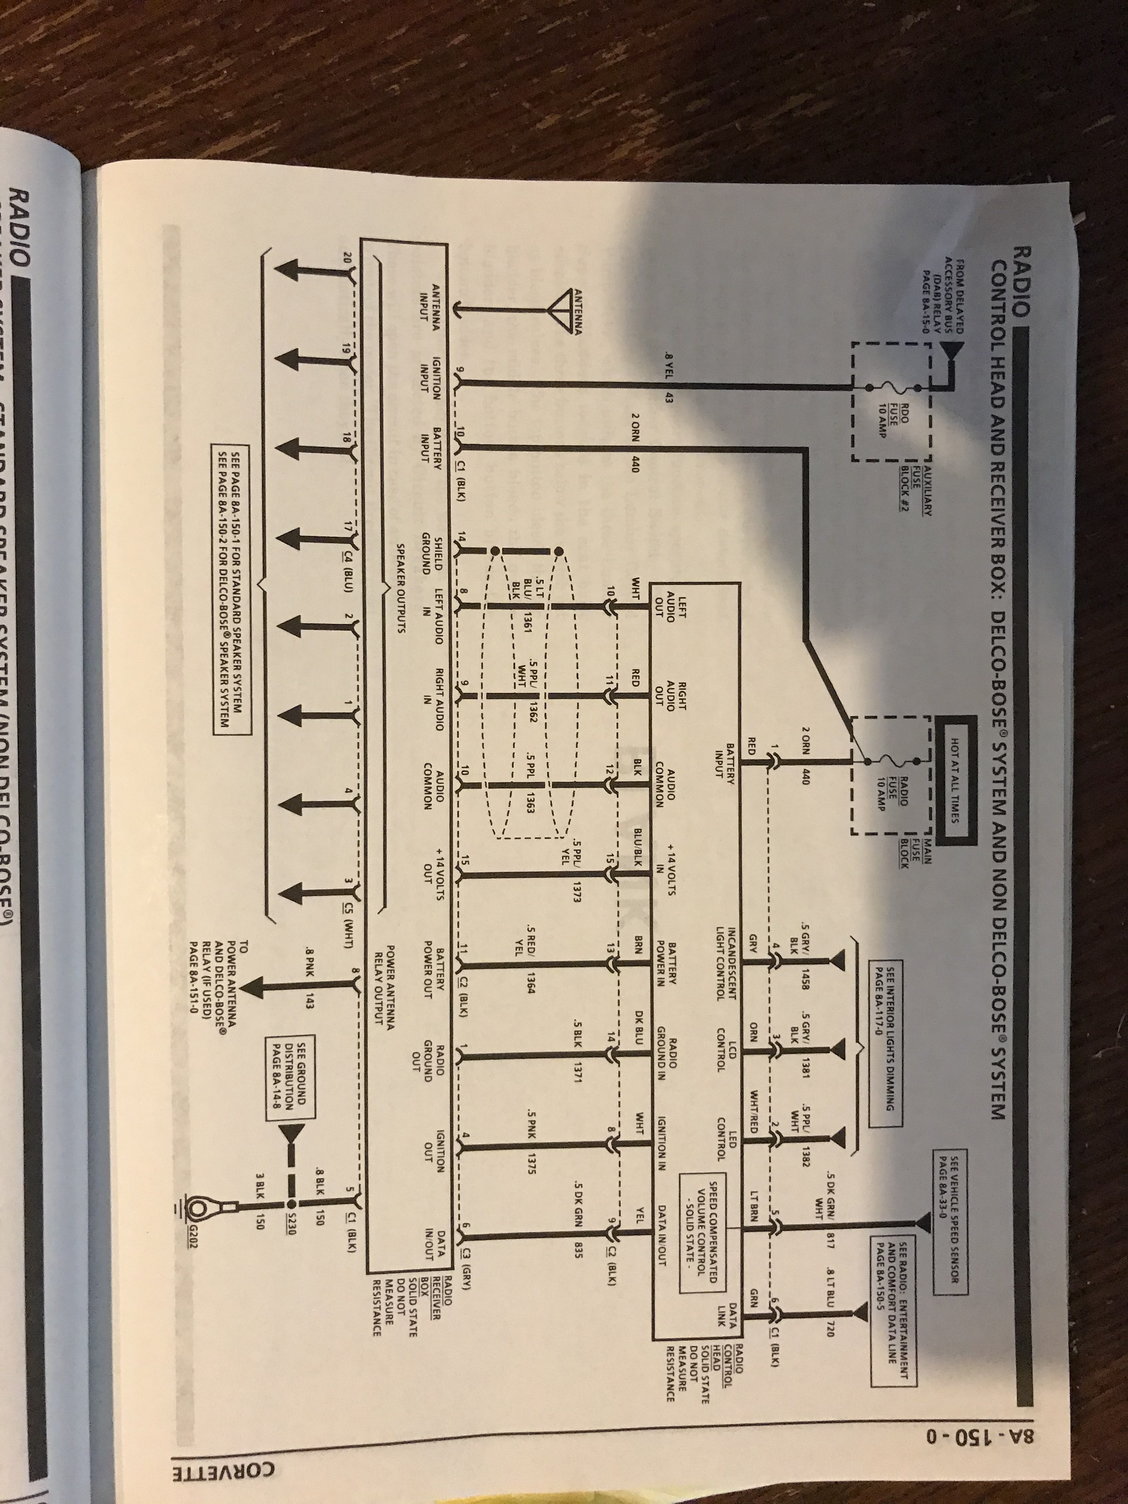 Delco Bose Gold Series Wiring Diagram from cimg0.ibsrv.net